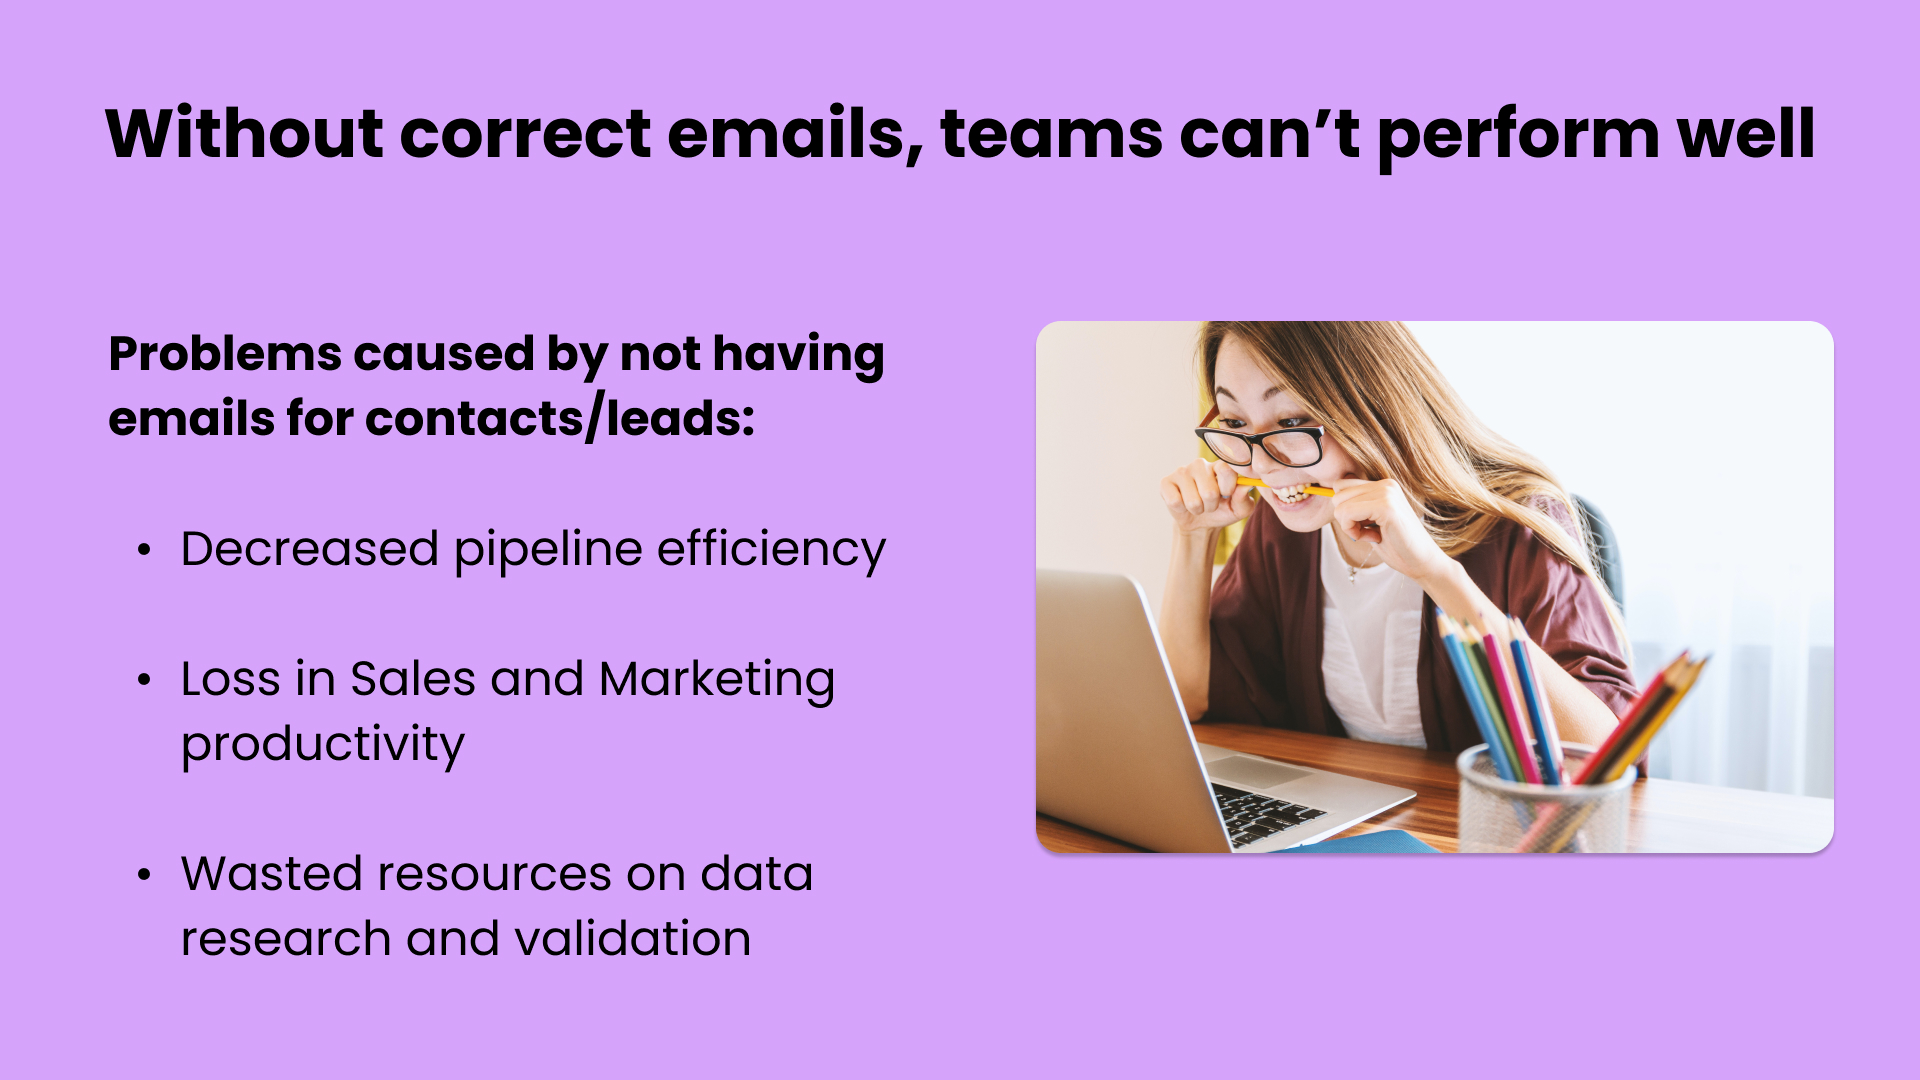 The problems of bad emails include decreased pipeline efficiency, loss in productivity and wasted resources.